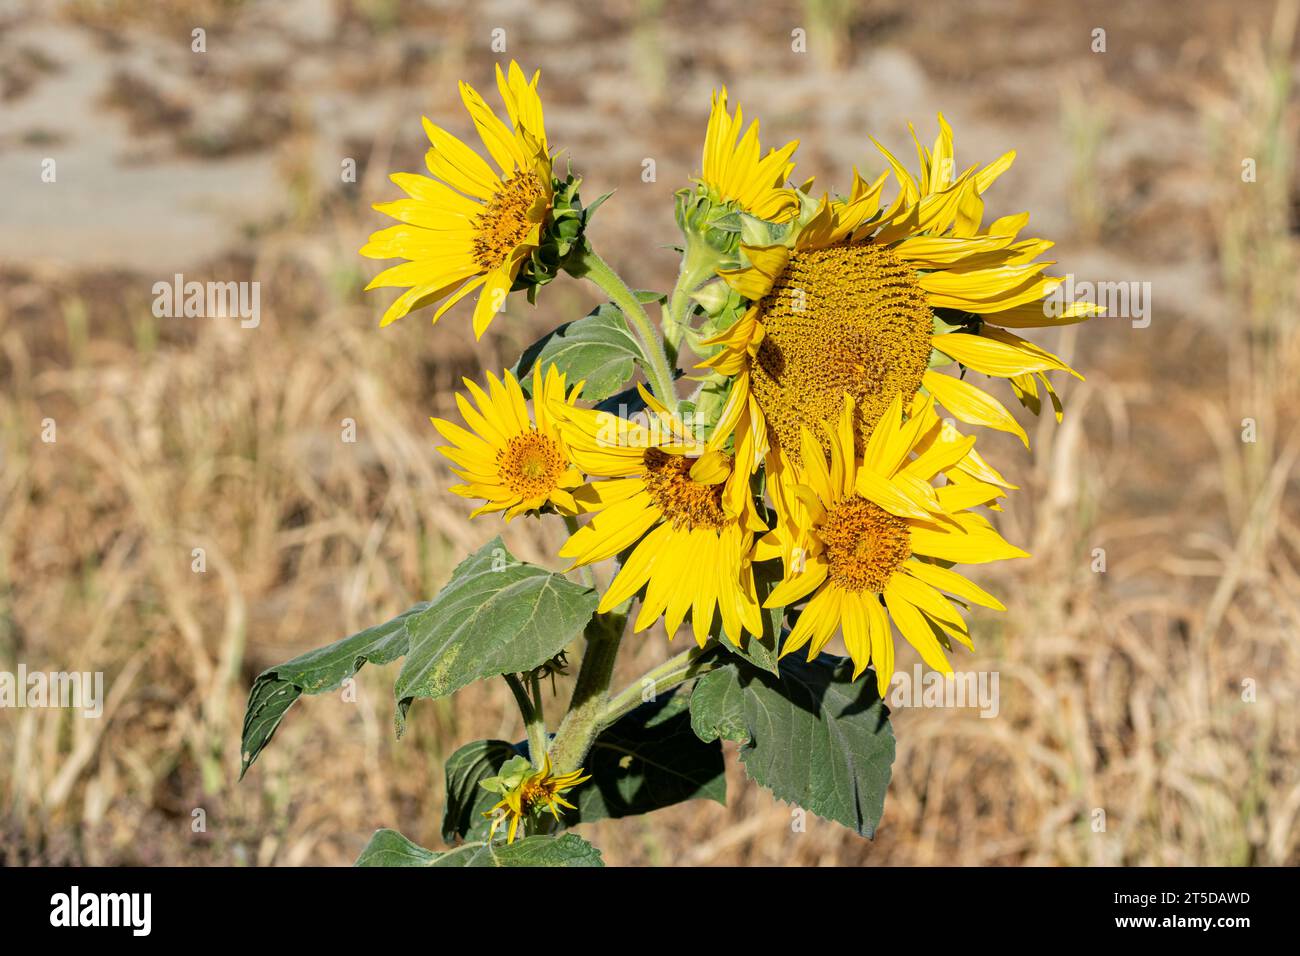 The California sunflower (Helianthus californicus), seen here in the Mojave Desert,  is native to California and Baja California in Mexico. Stock Photo